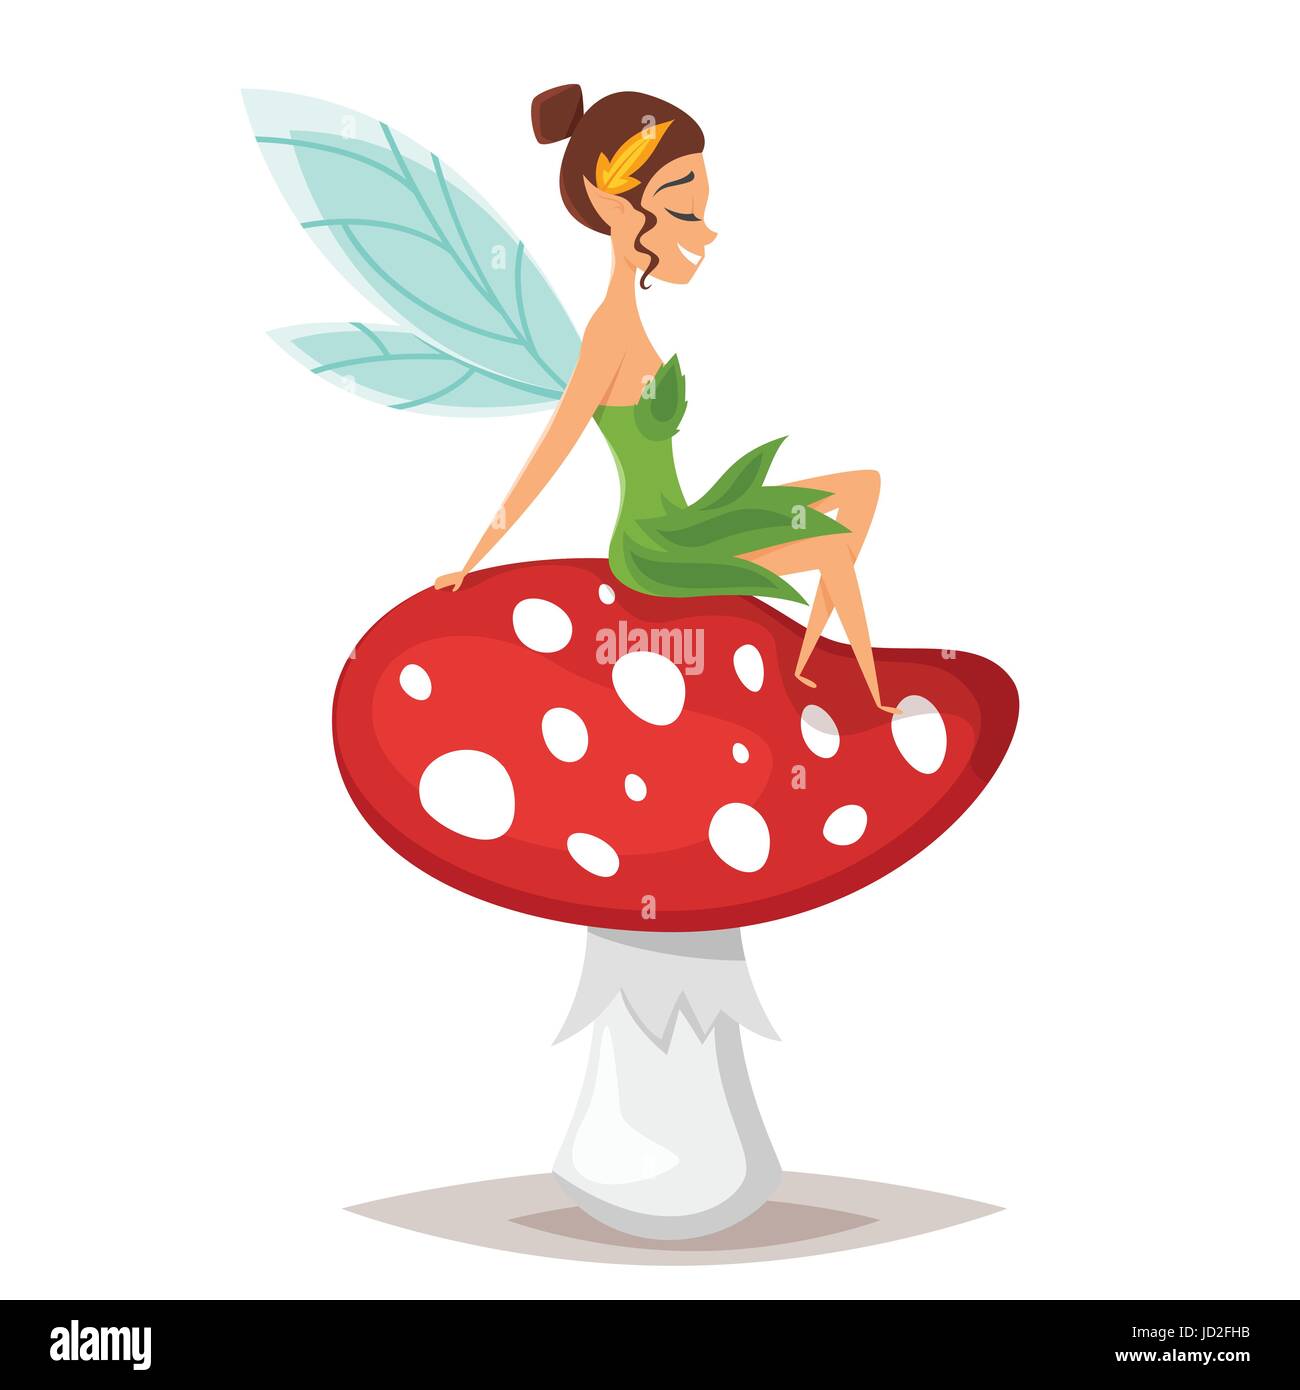 Vector cartoon style illustration of smiling fairy sitting on big red Amanita mushroom. Isolated on white background. Stock Vector